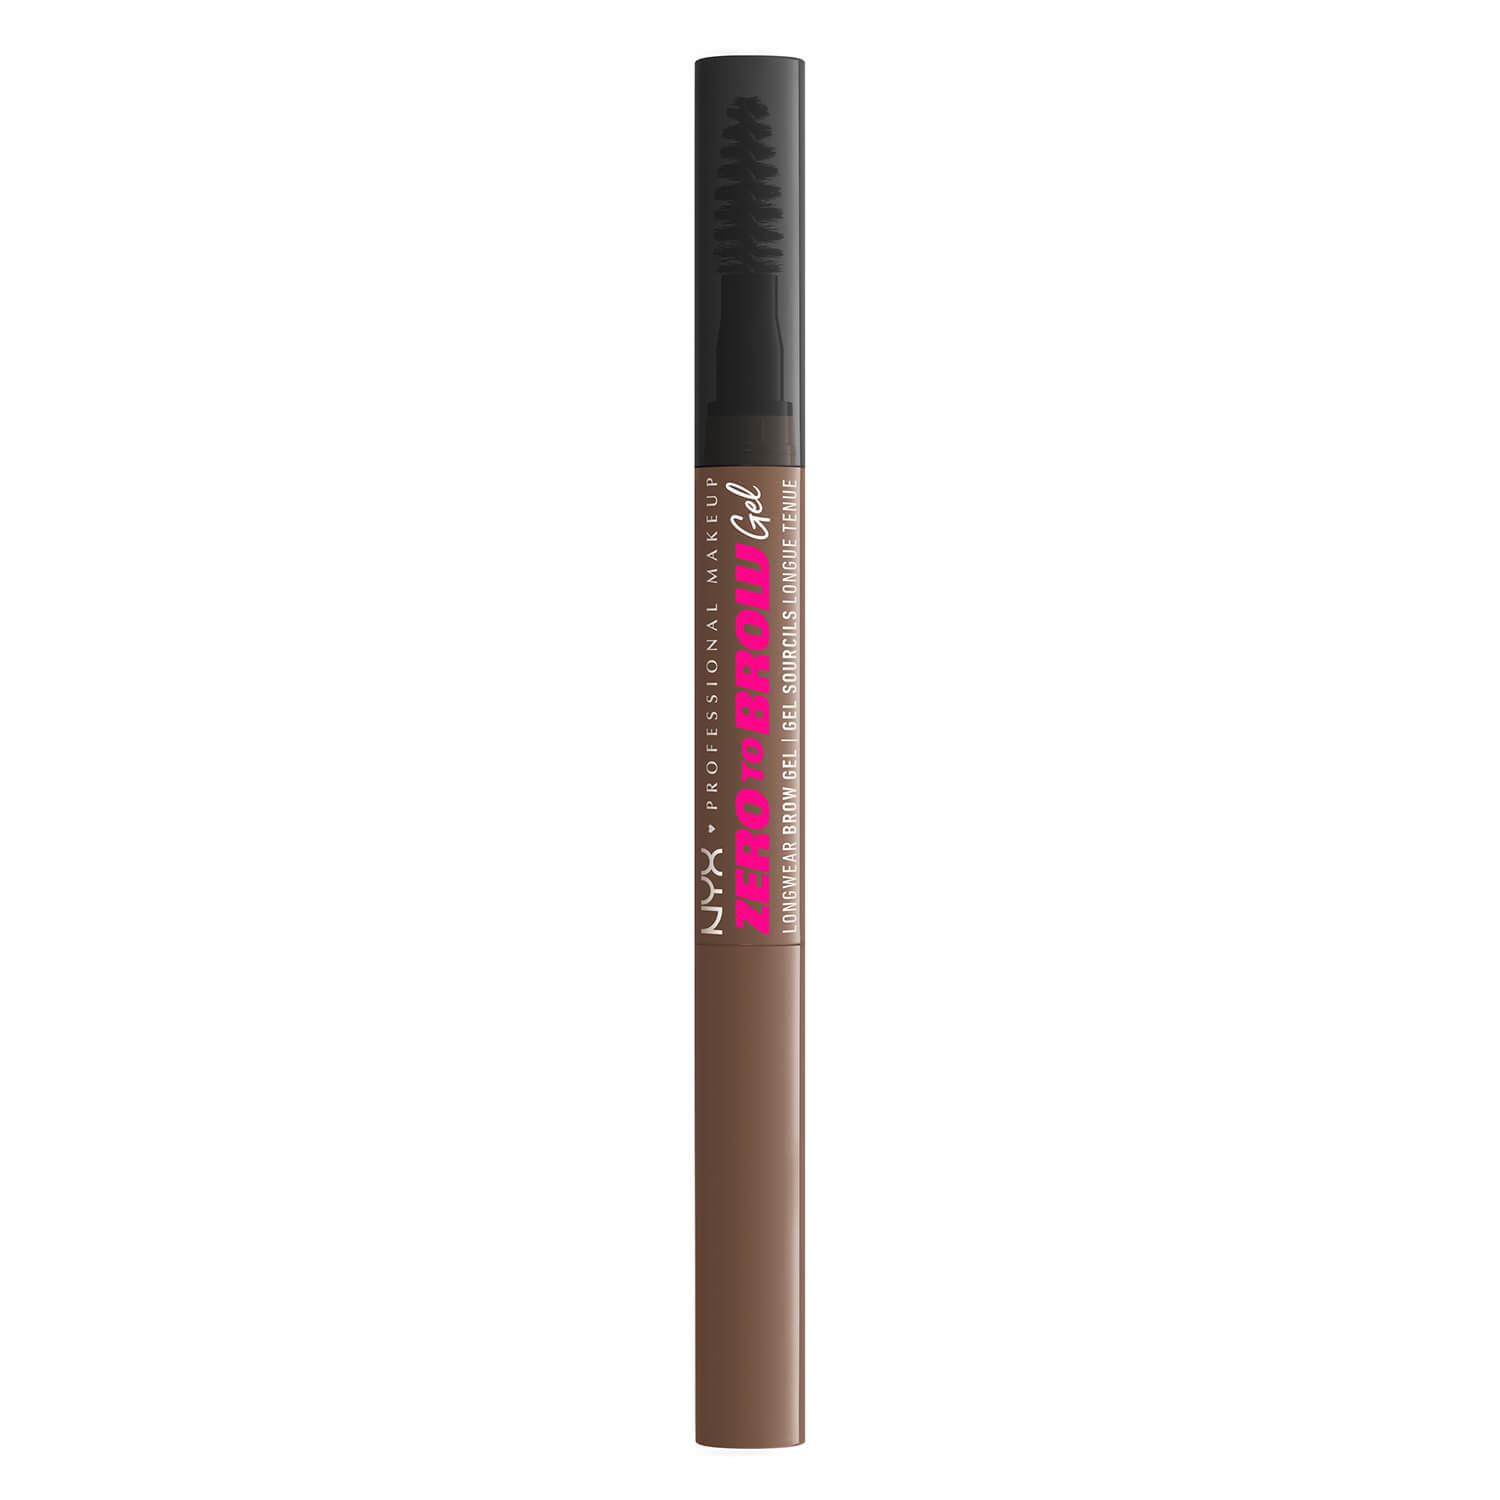 NYX Brows - Zero To Brow Gel 05 Ash Brown